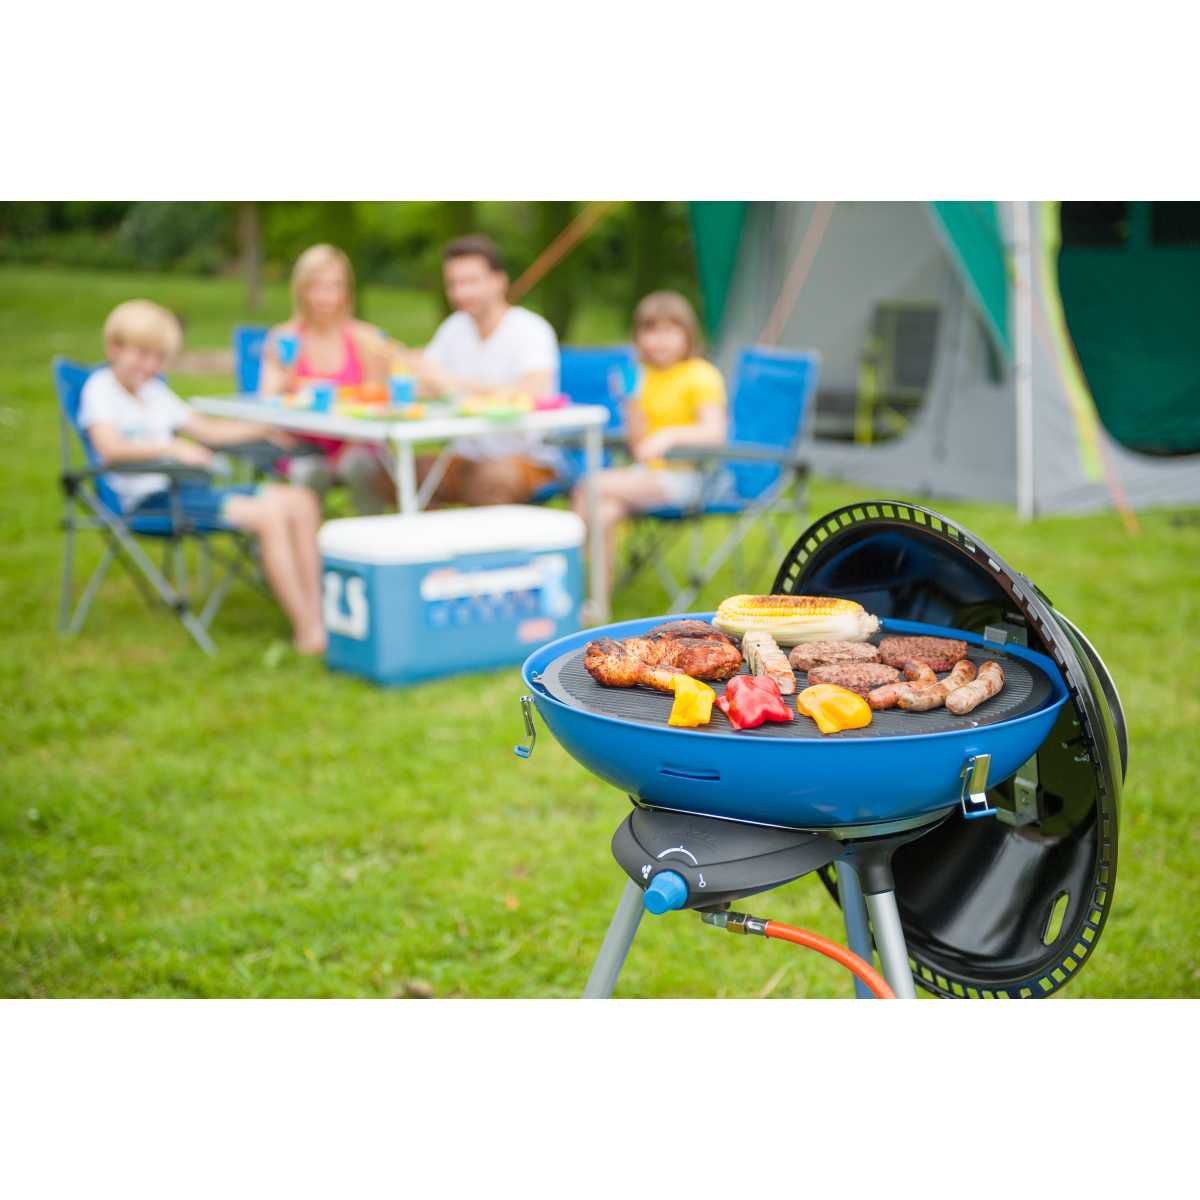 CAMPINGAZ Party Grill 600 R - 2000025698